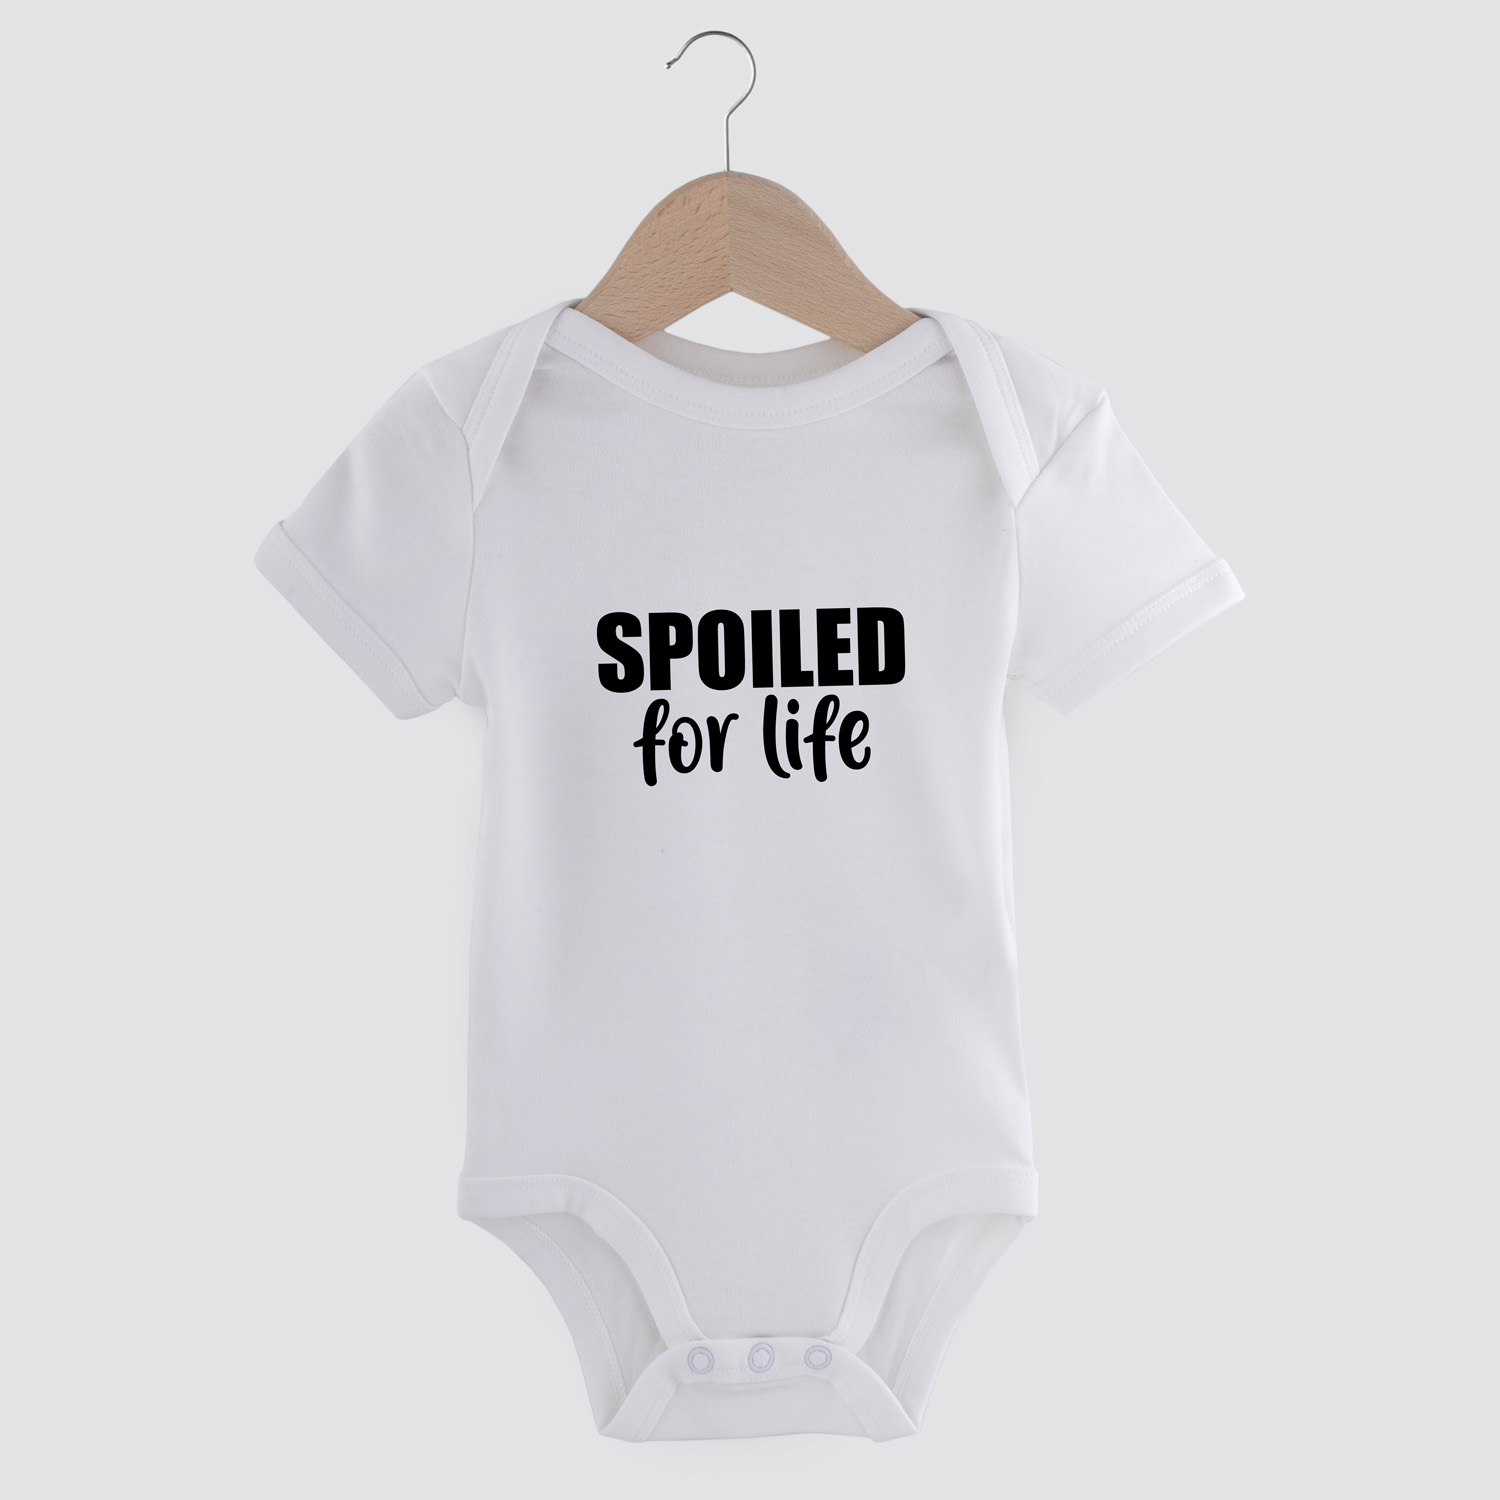 Spoiled for life | Baby romper | my fabulous life.